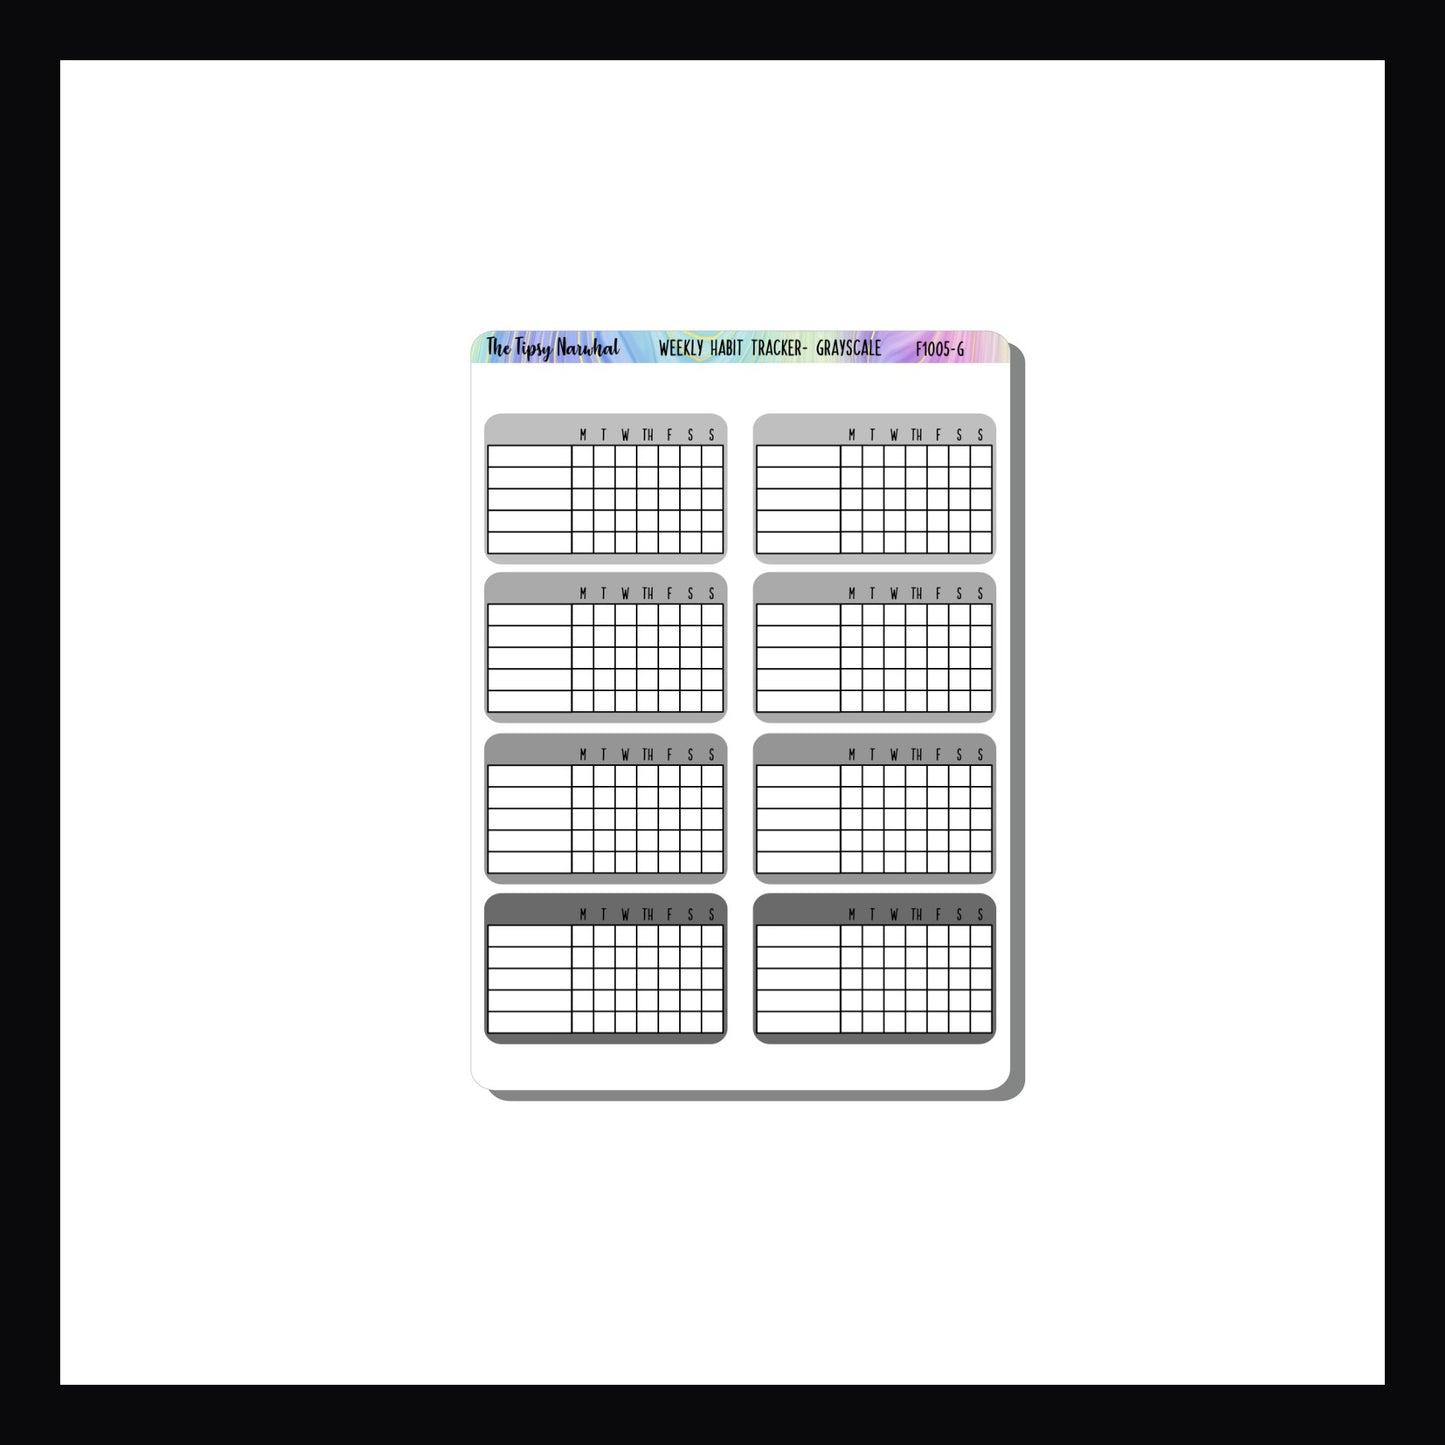 Grayscale habit tracking stickers.  8 stickers per sheet, 5 habits tracked over one week